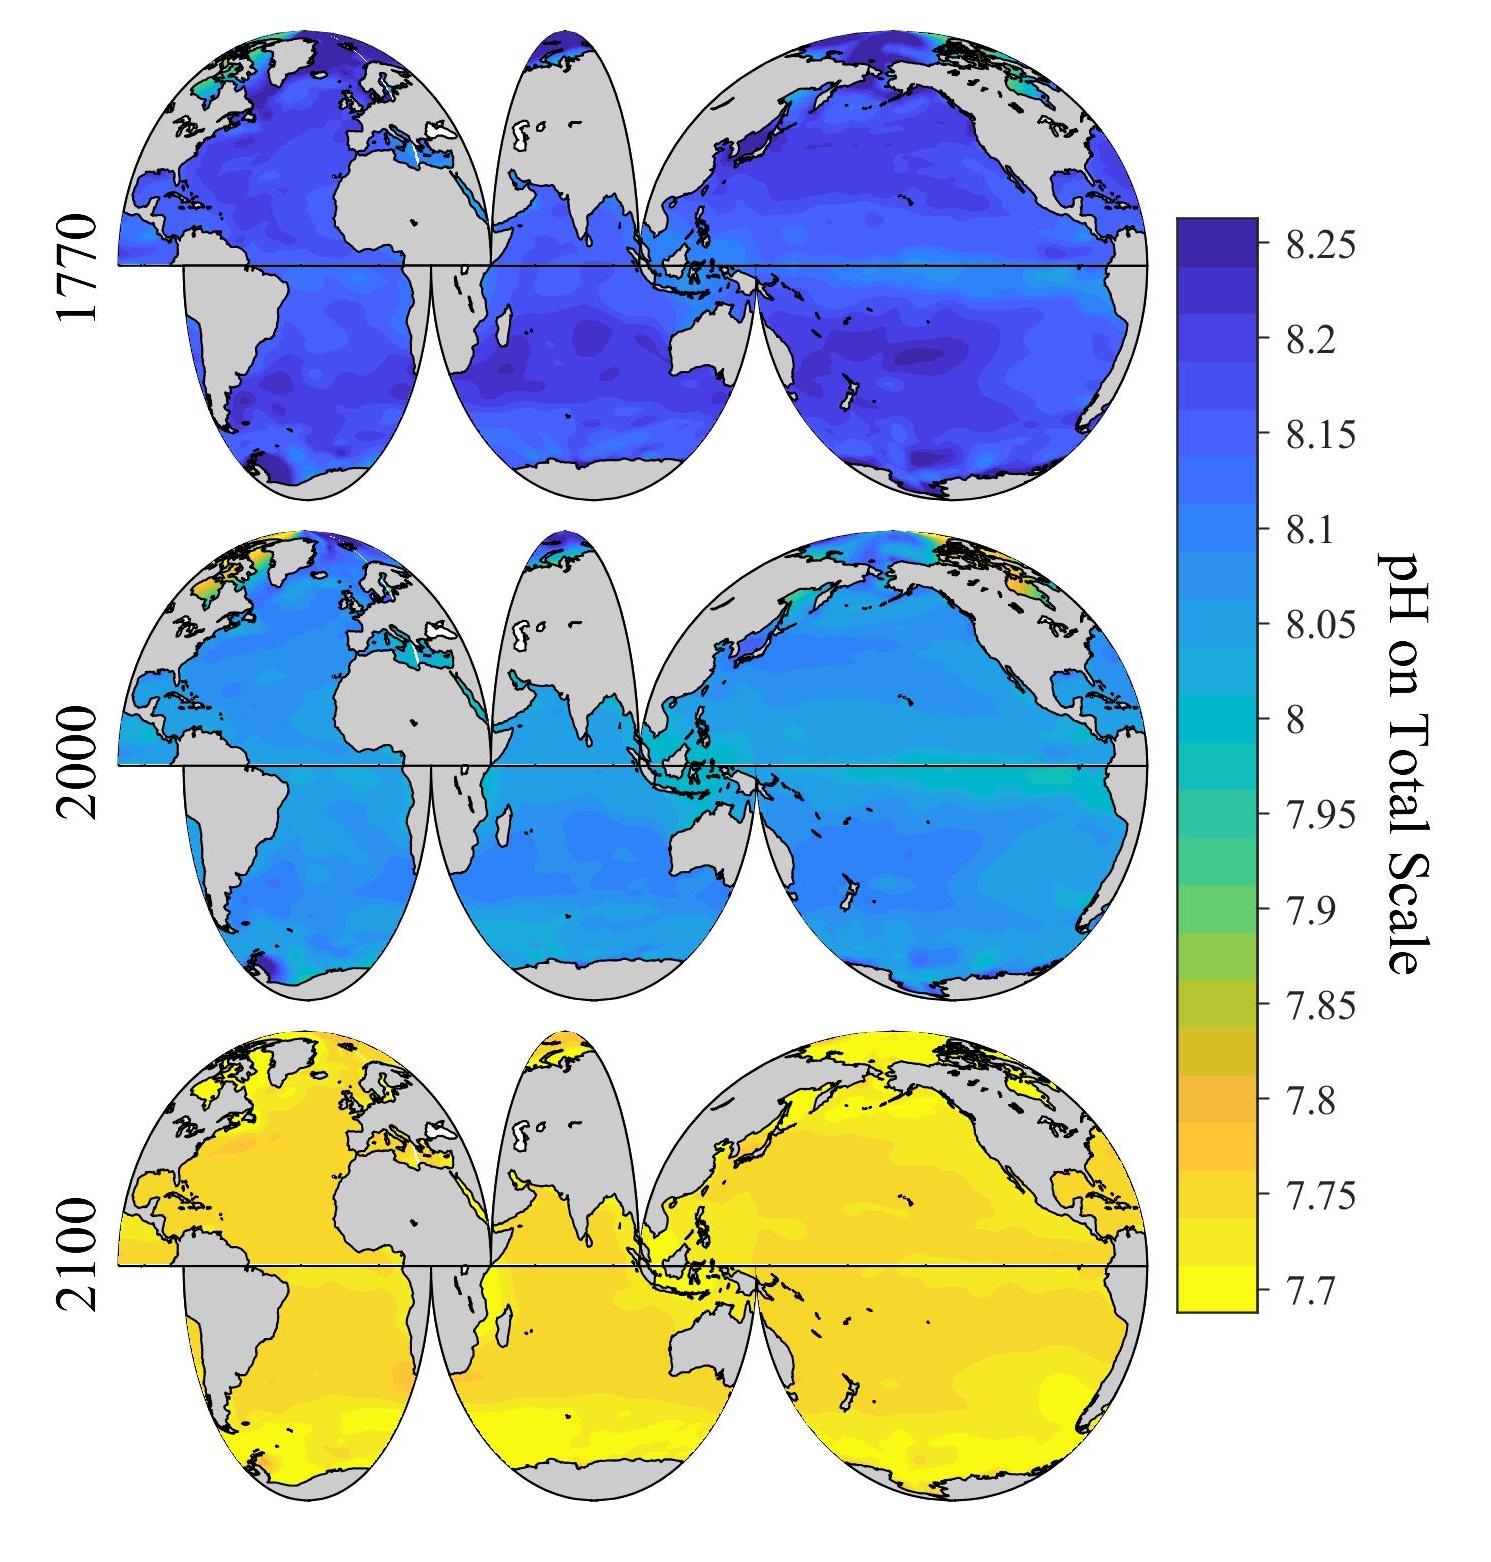 Researchers have developed the most high-resolution images to date showing changes in global Ocean acidification. Image Credit: Li-Qing Jiang, University of Maryland